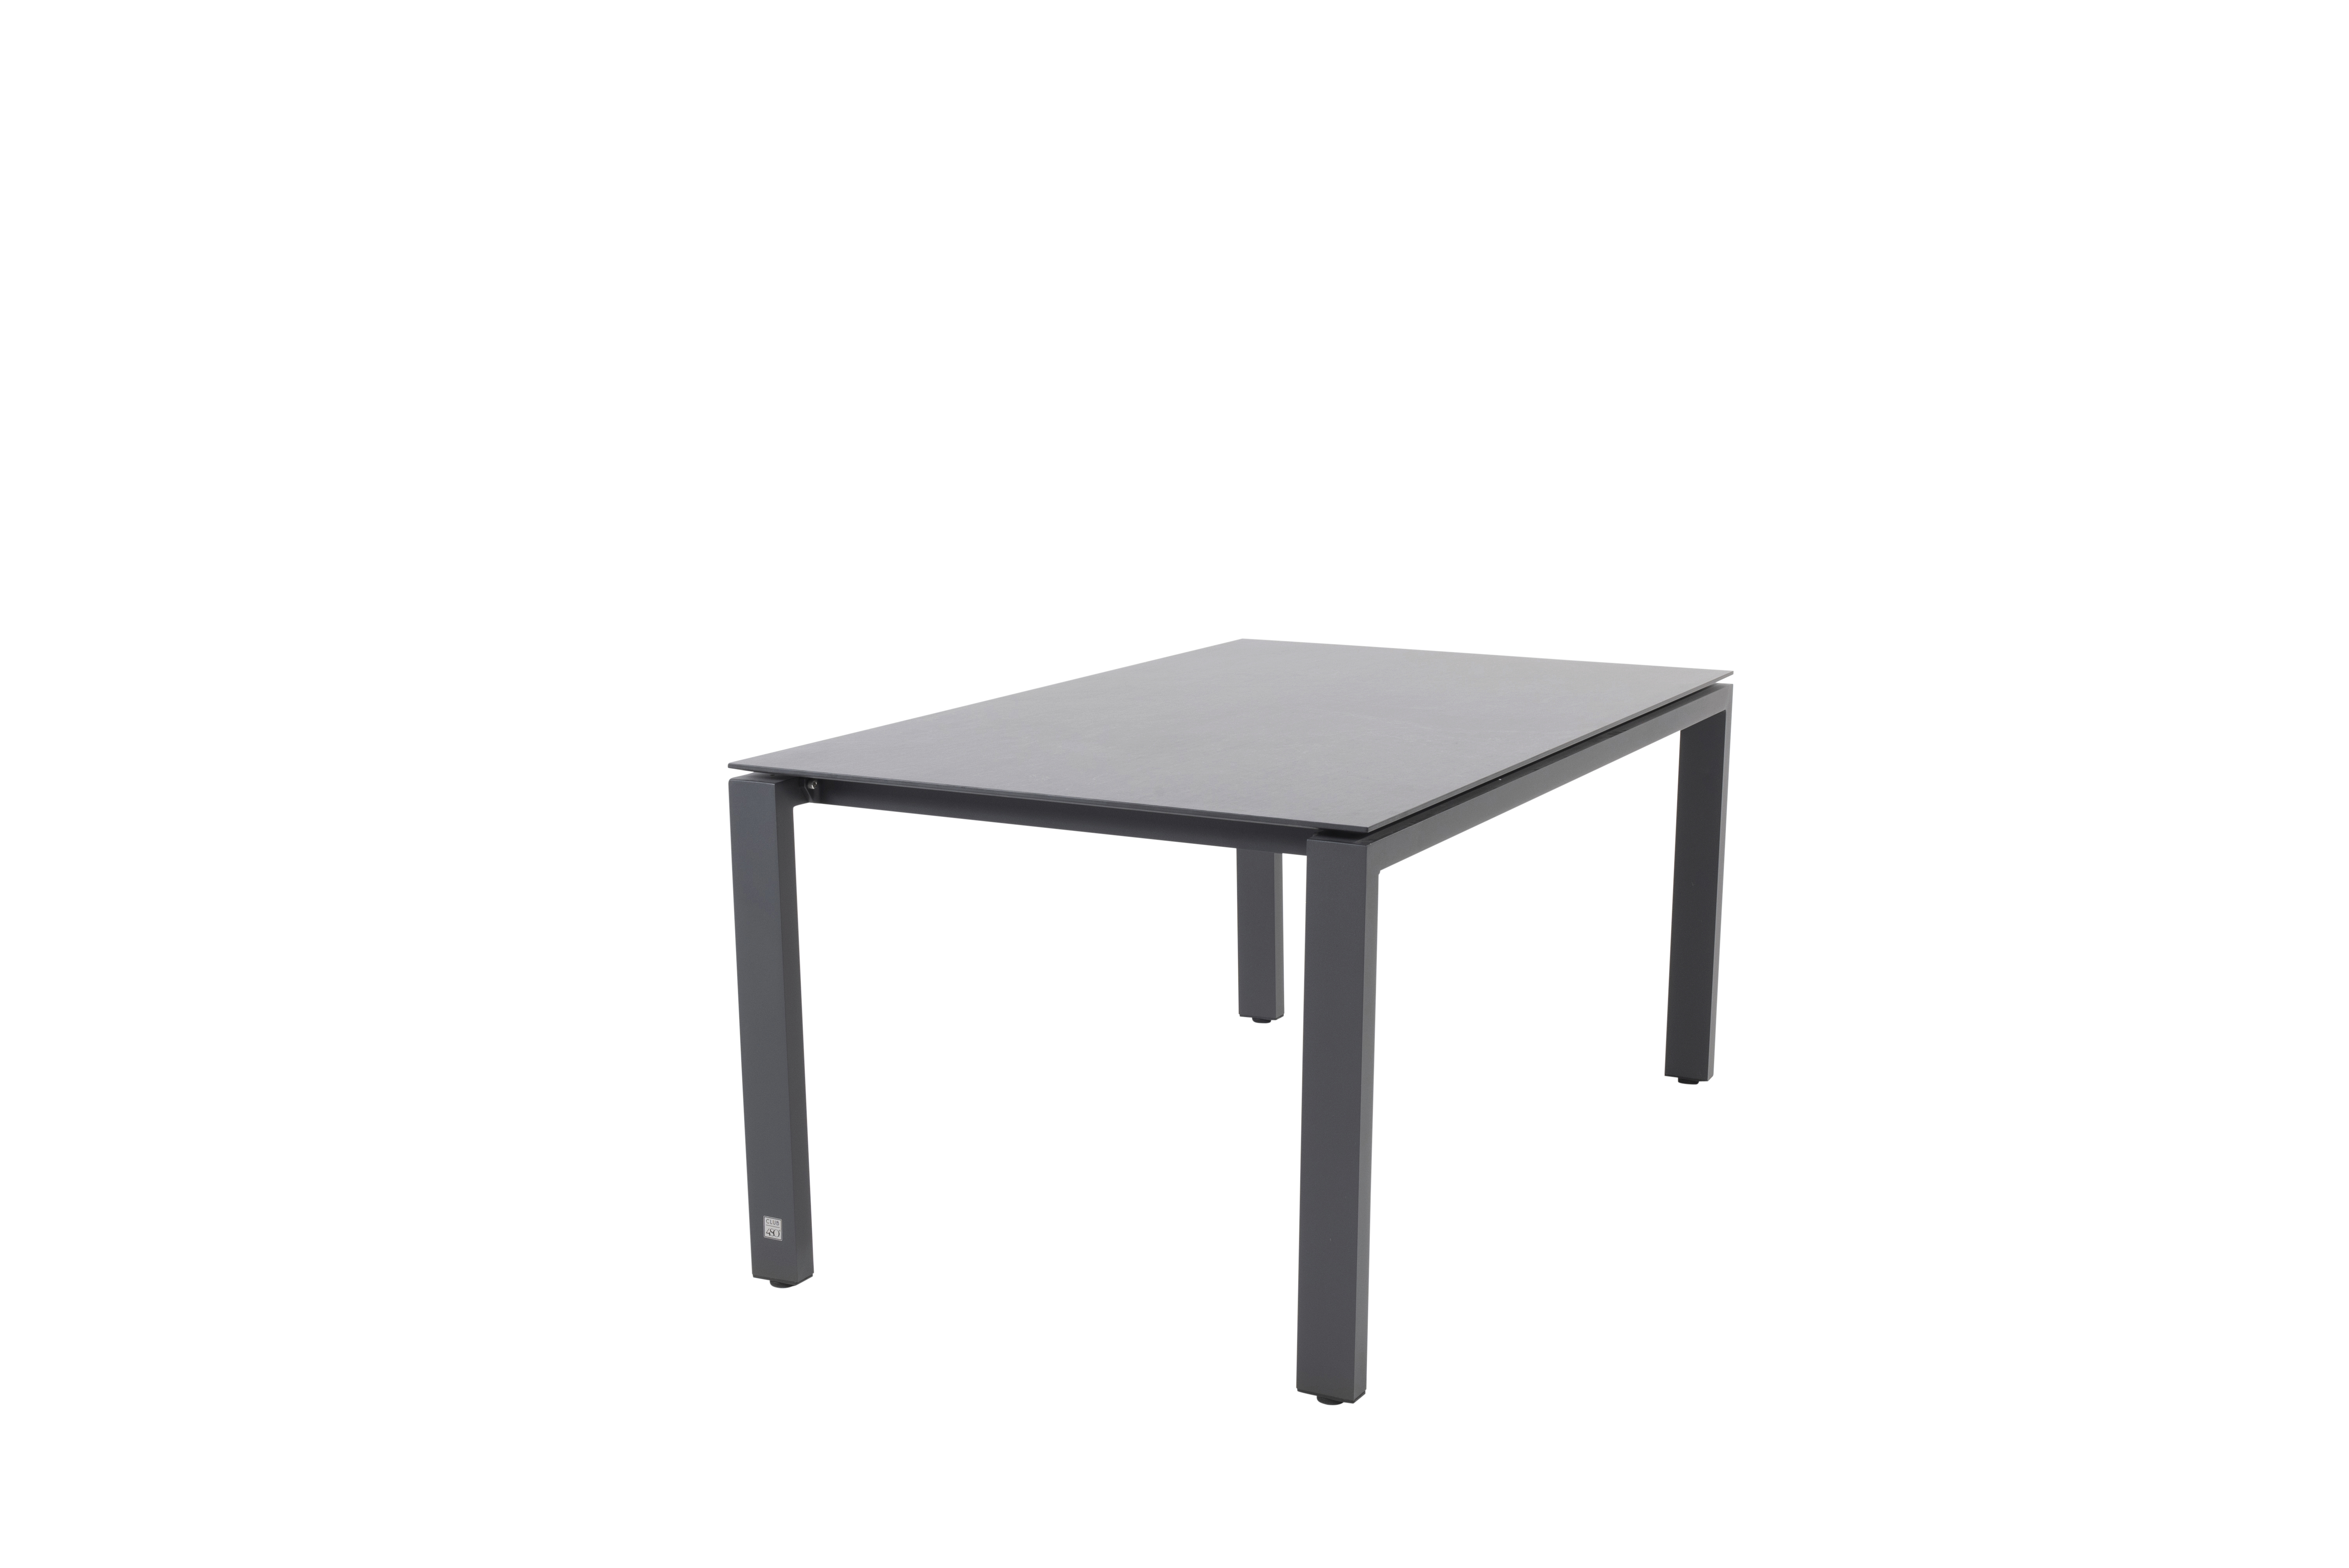 19609-19931_ Goa dining table 160x95cm with HPL Slate anthracite 02